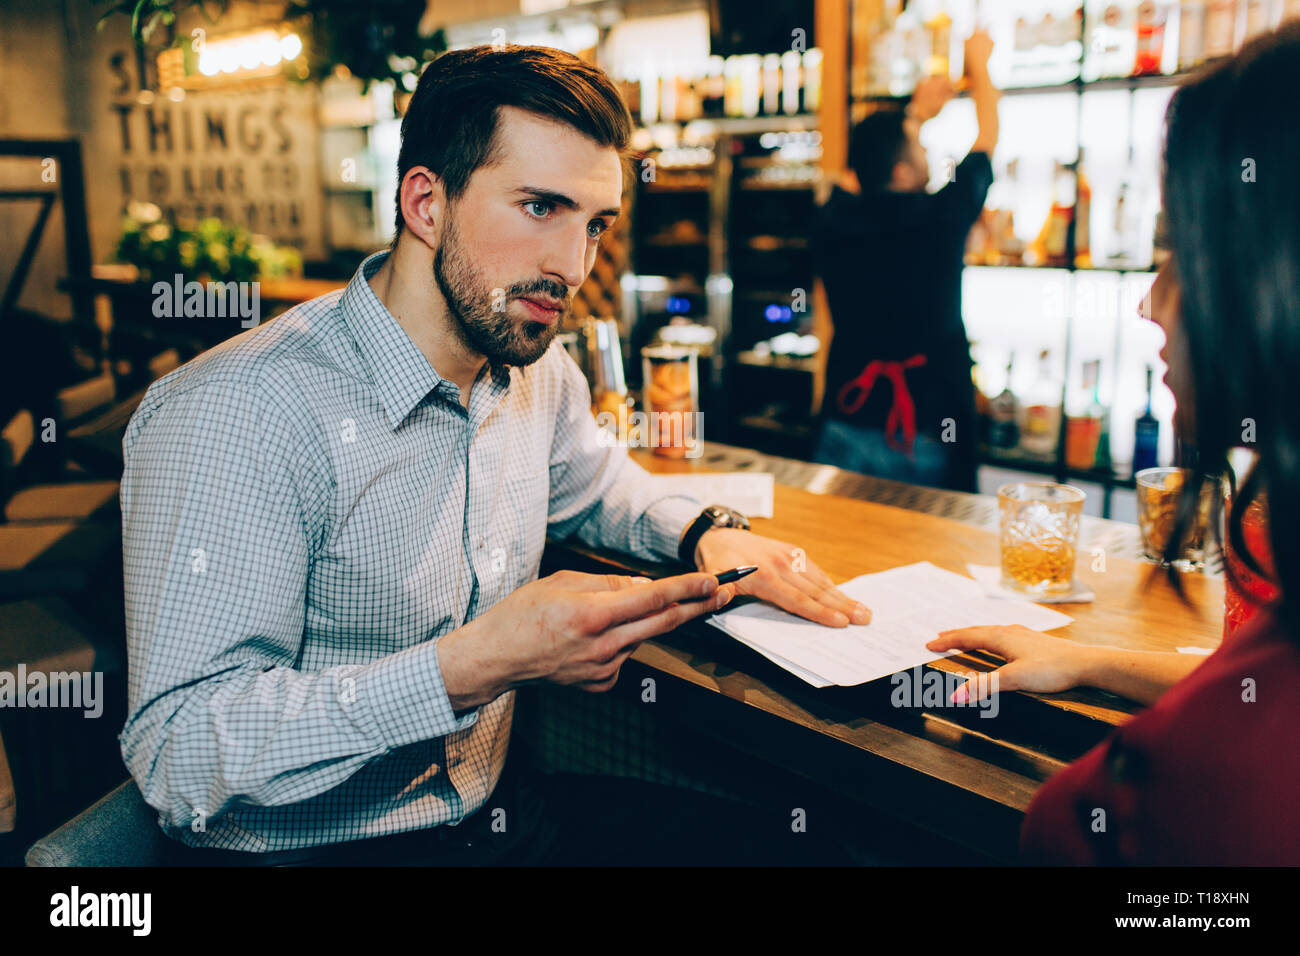 A business meeting of two people in a bar. Man is explaining something to woman. She is listening to him very accurate and careful. Barman is standing Stock Photo